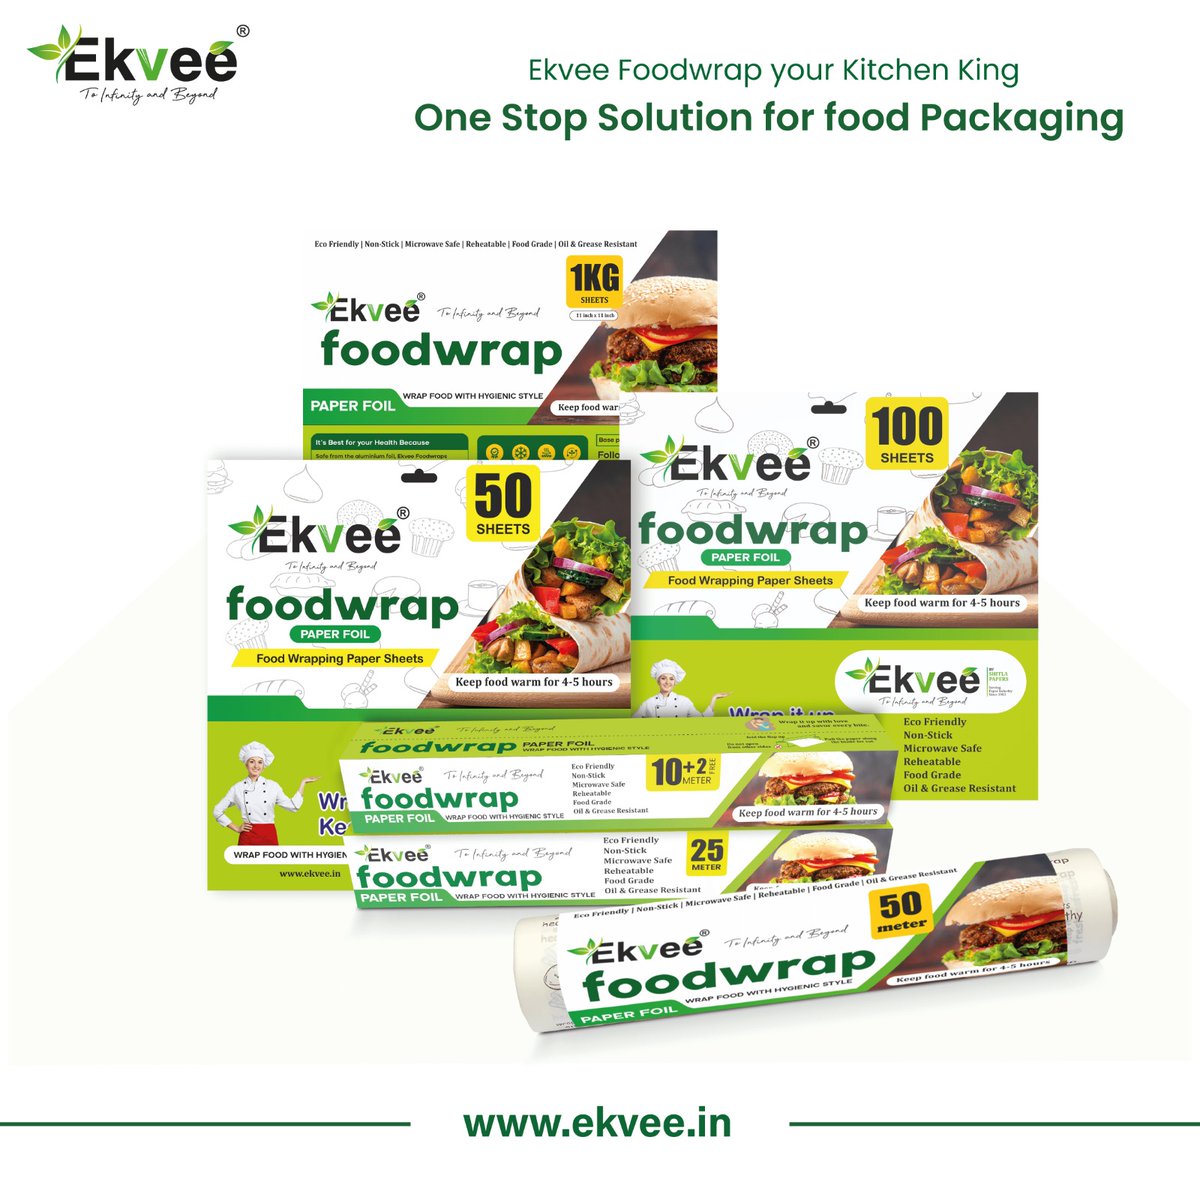 Ekvee Foodwrap - your ultimate kitchen companion for hassle-free food packaging! Say goodbye to cling films and messy wraps.
#ekveefoodwrap #ekvee #ekveefoodwrappingpaper #EkveeFoodwrap #KitchenKing #FoodPackaging #OneStopSolution #FreshnessMatters #EcoFriendly #SustainableLiving